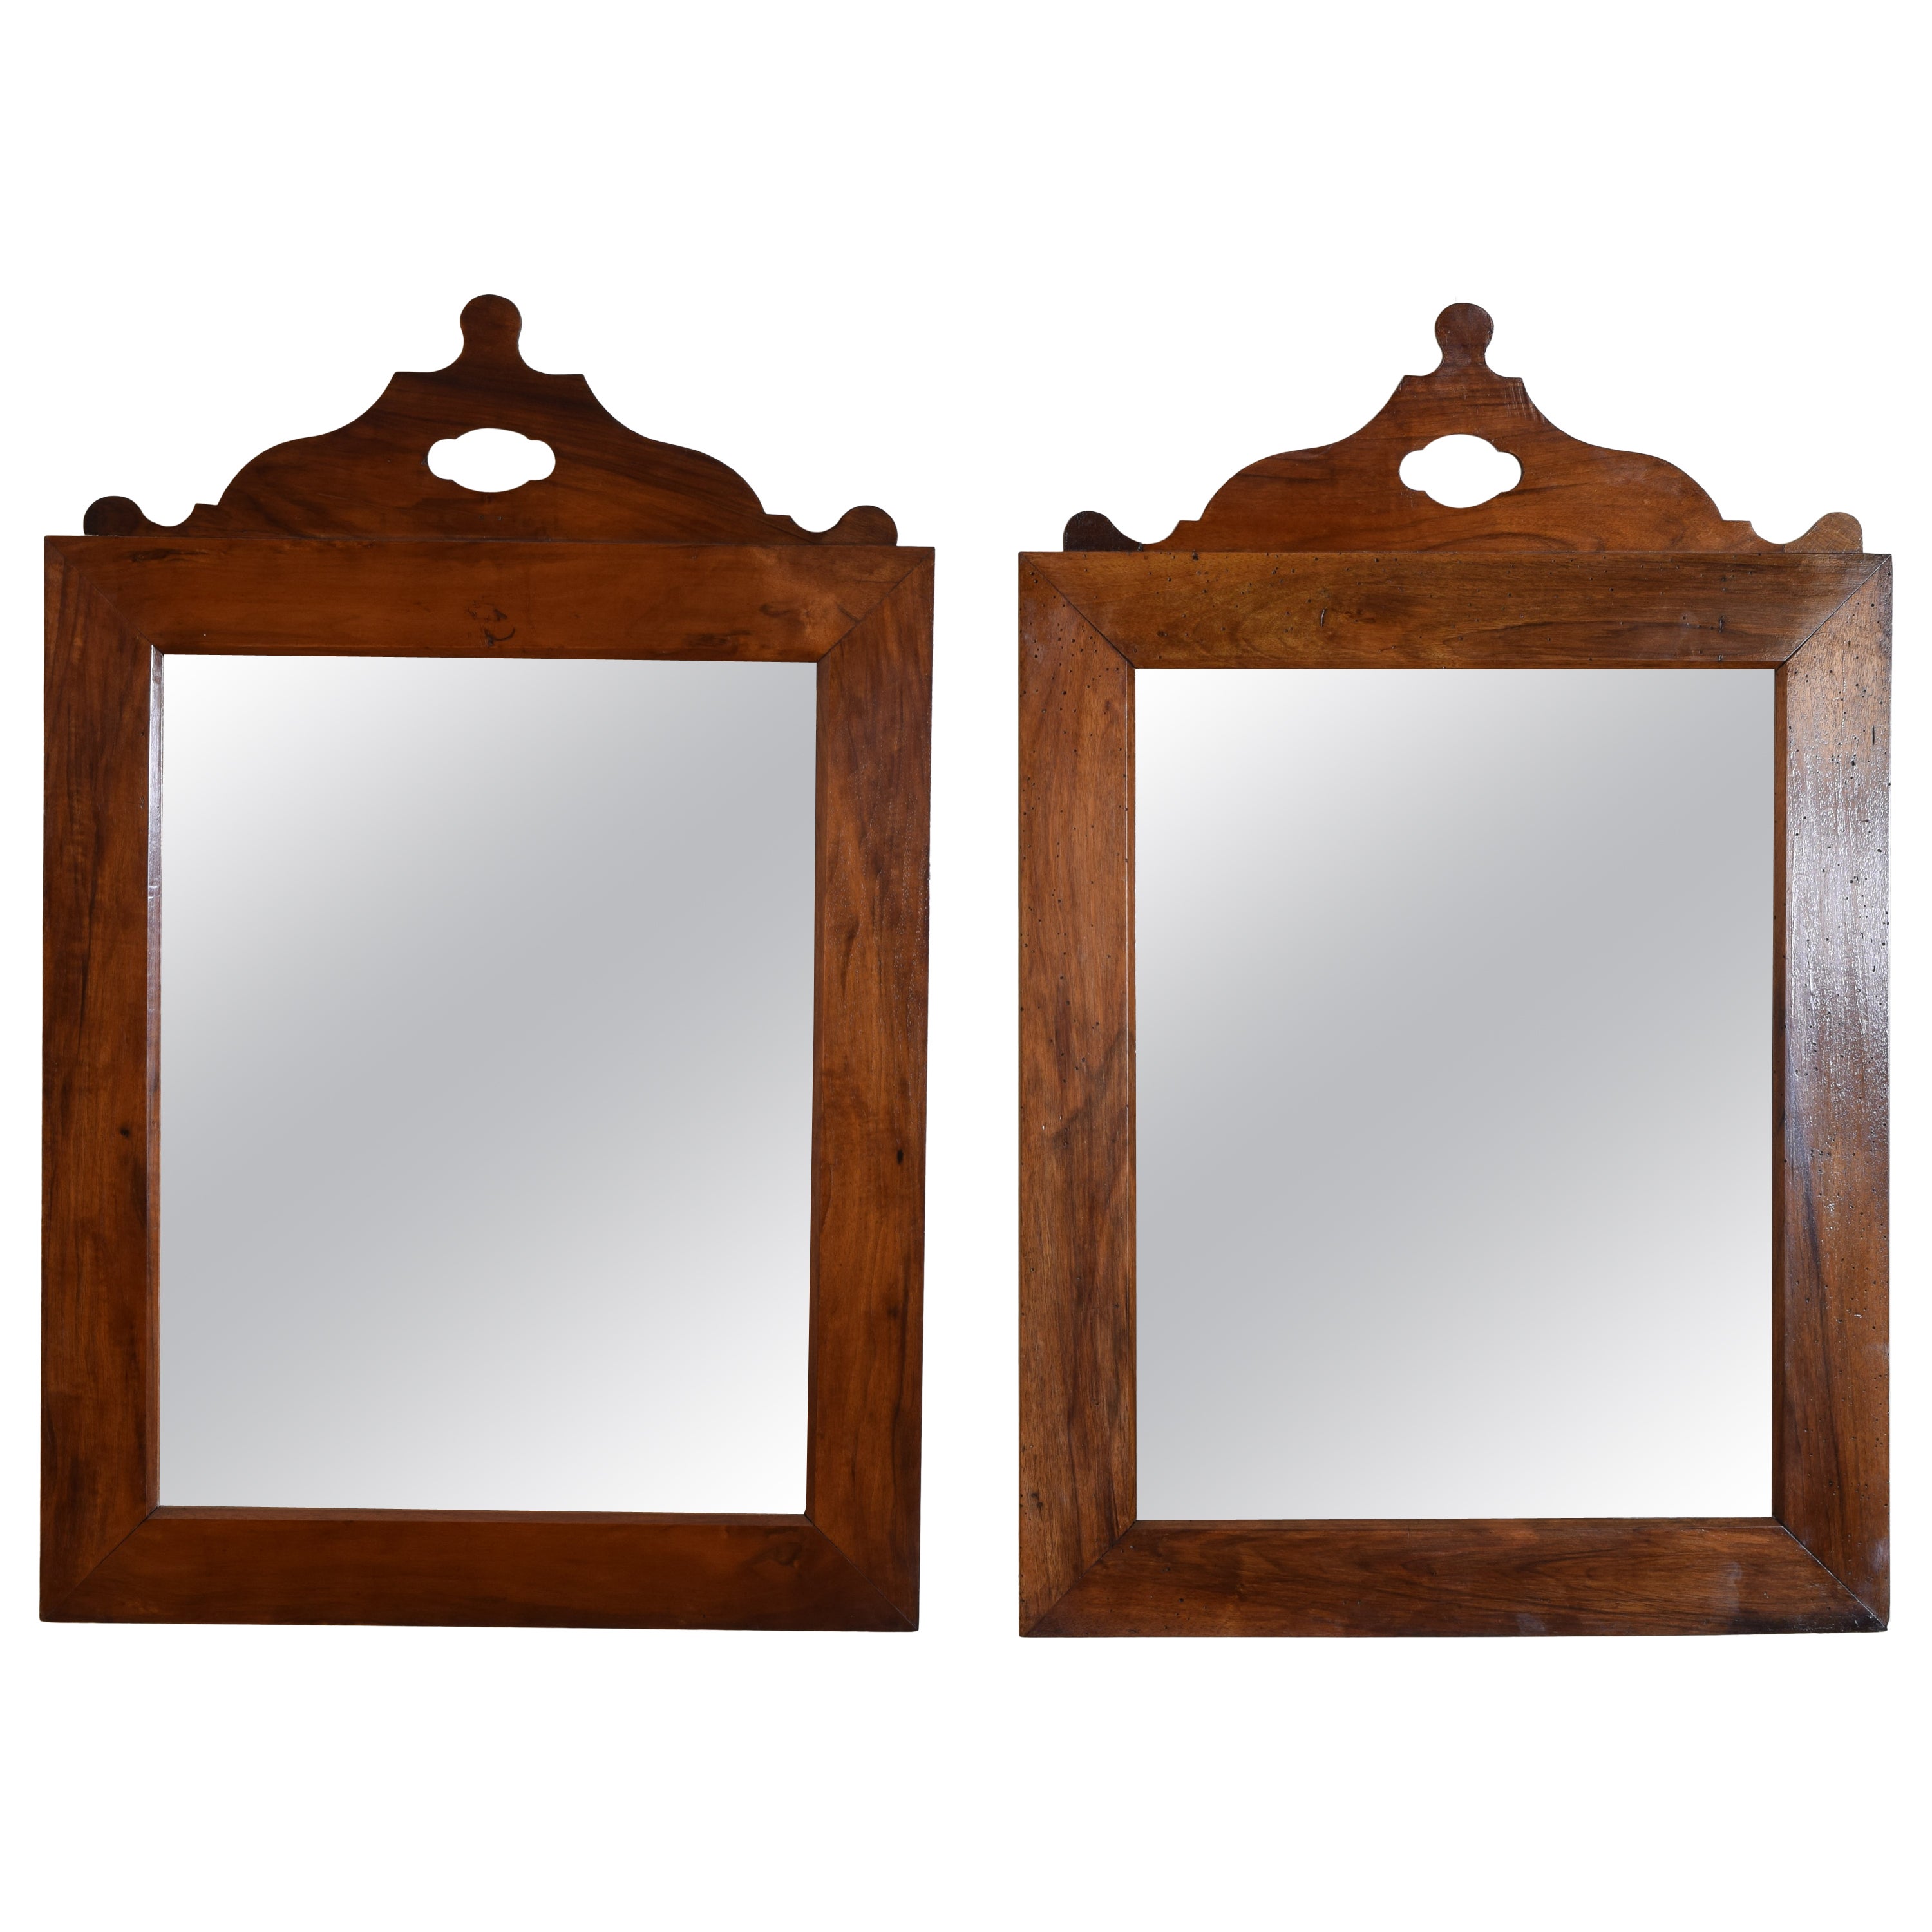 French Neoclassical Period Pair Shaped Walnut Mirrors, 2nd quarter 19th century For Sale